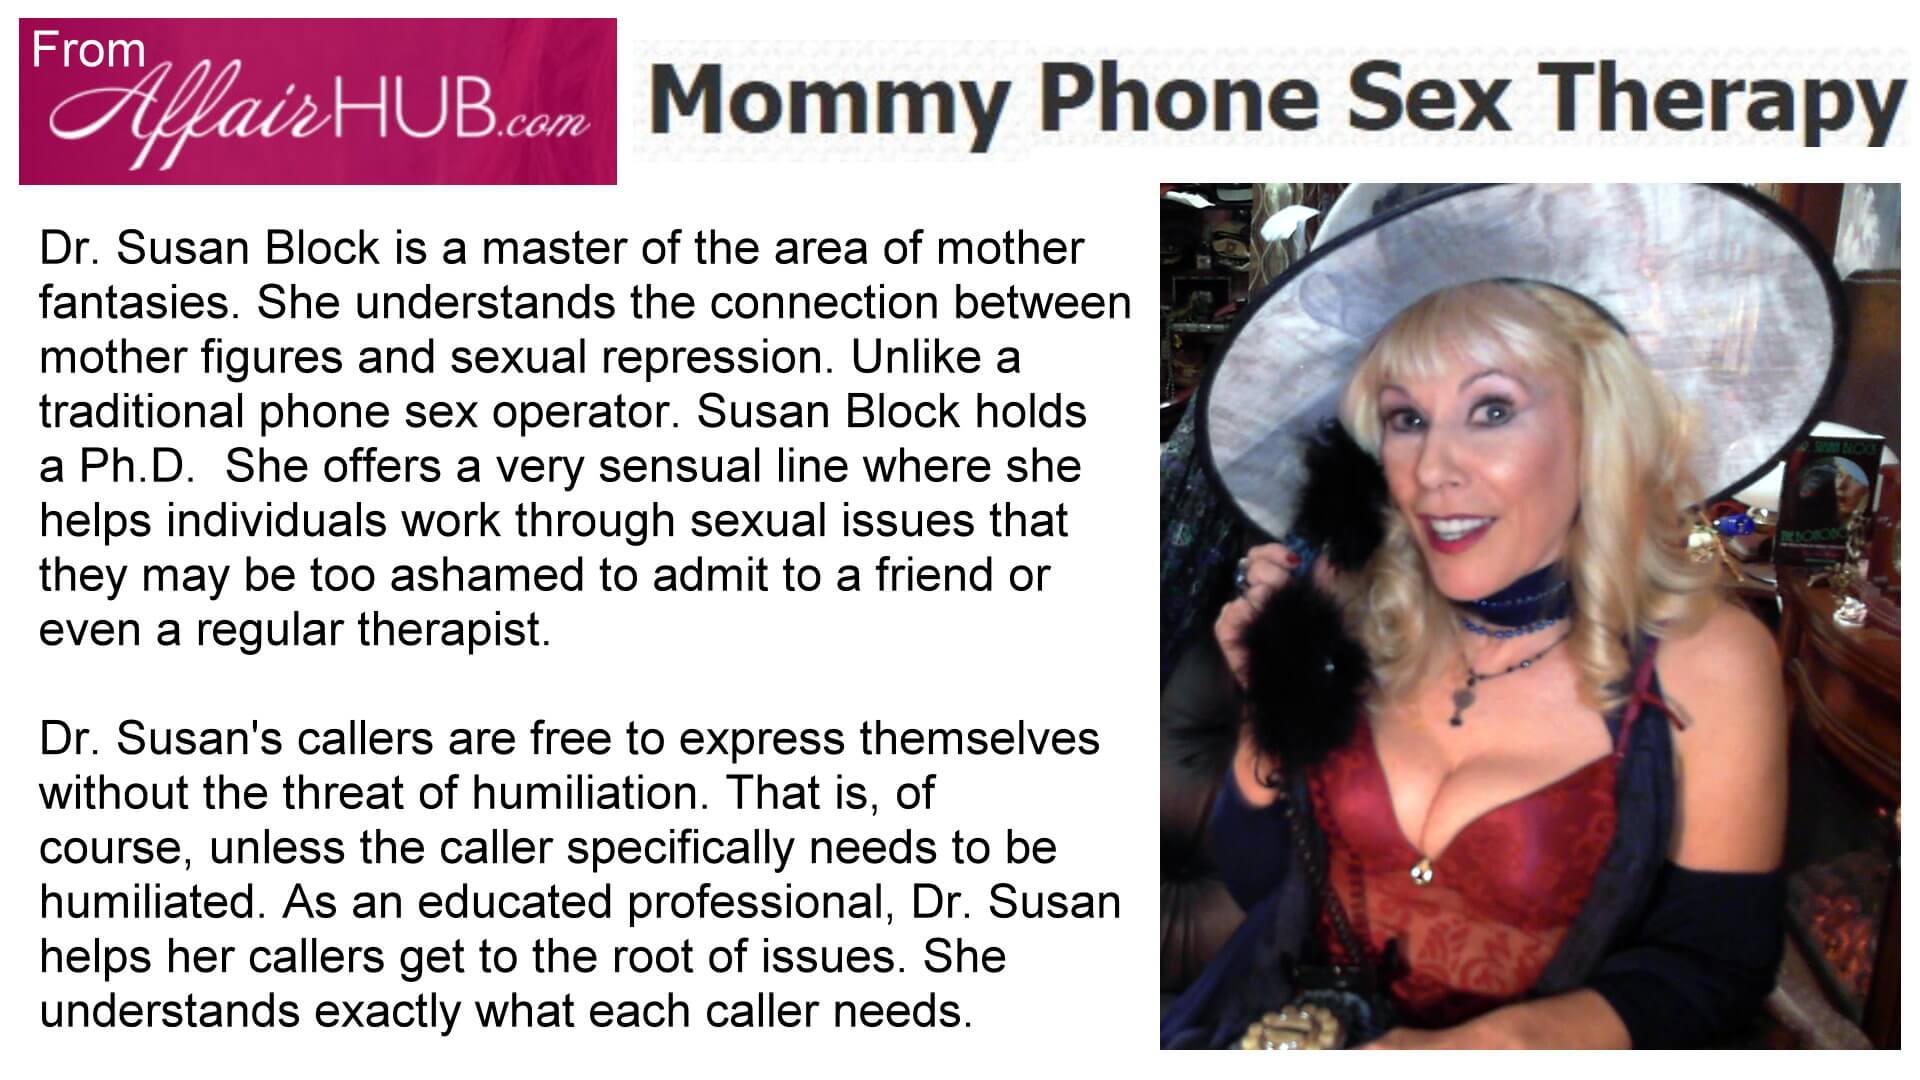 Mom Phone Sex Therapy image